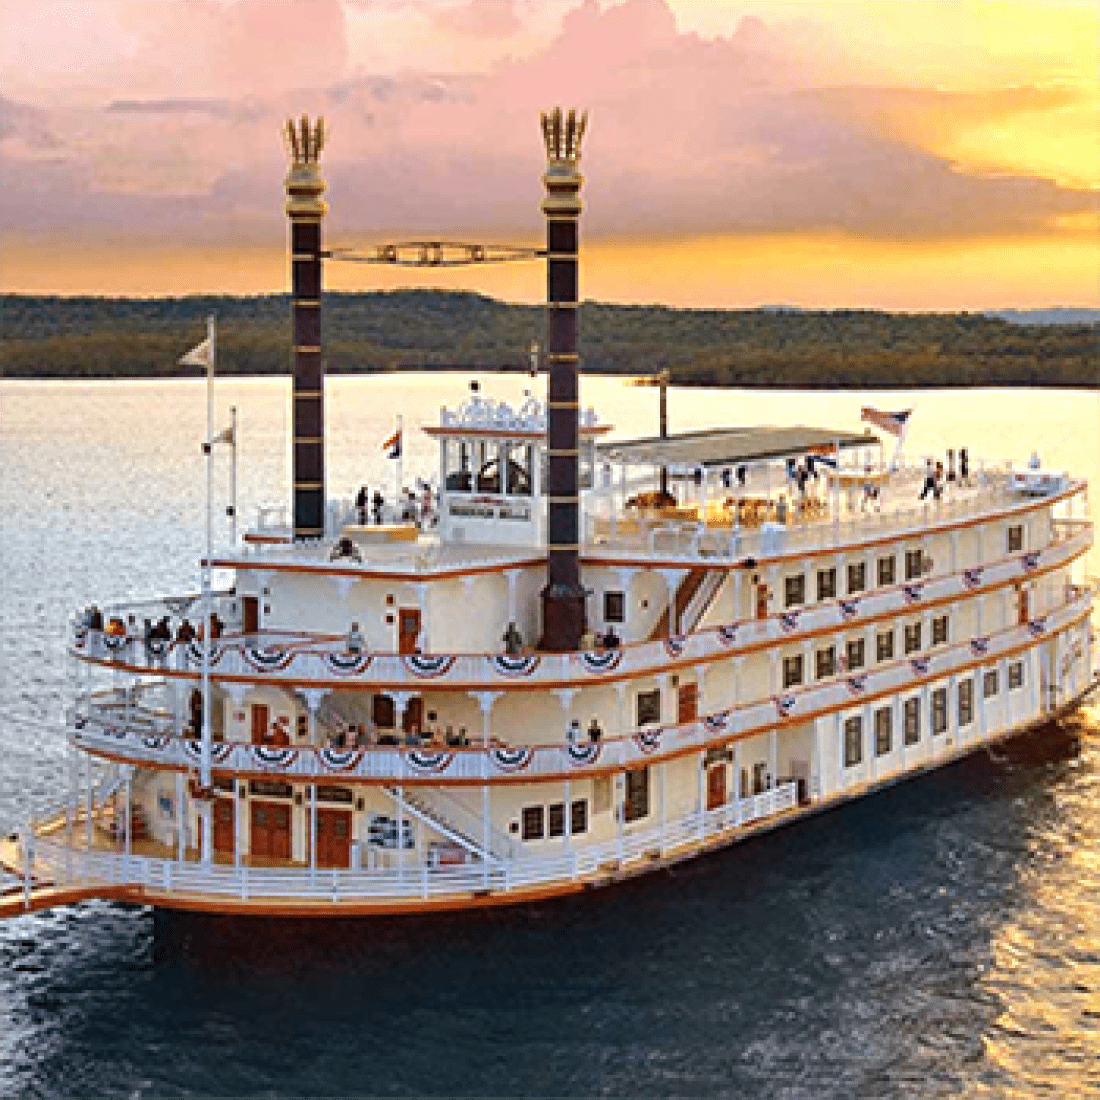 Riverboat/cruise ship in water